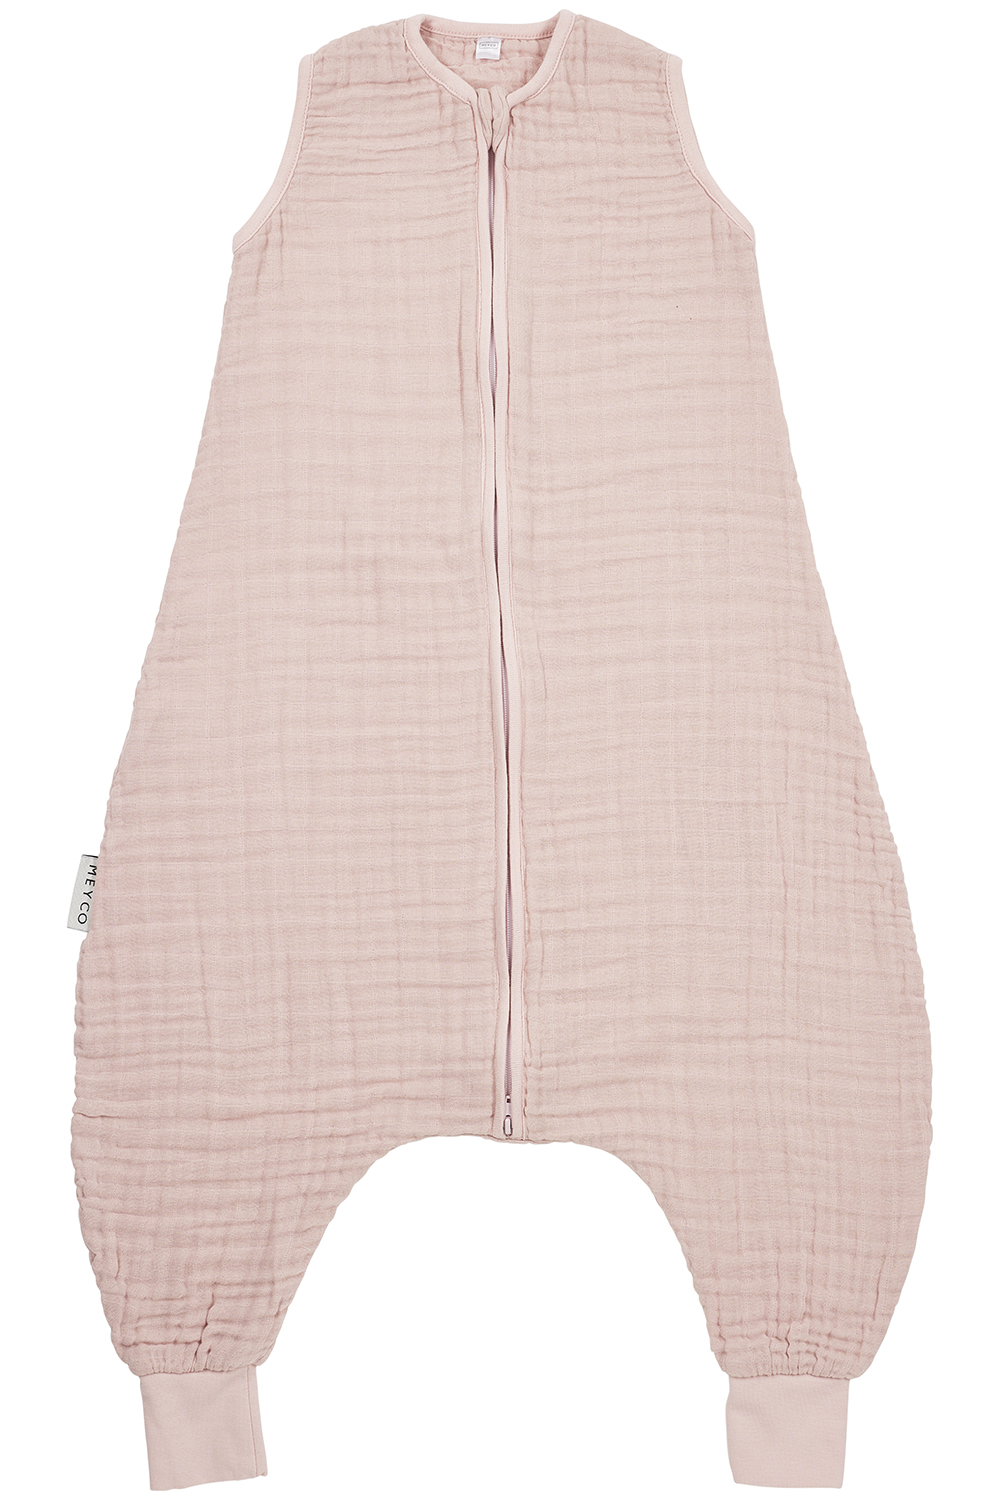 Baby zomer slaapoverall jumper pre-washed hydrofiel Uni - soft pink - 80cm